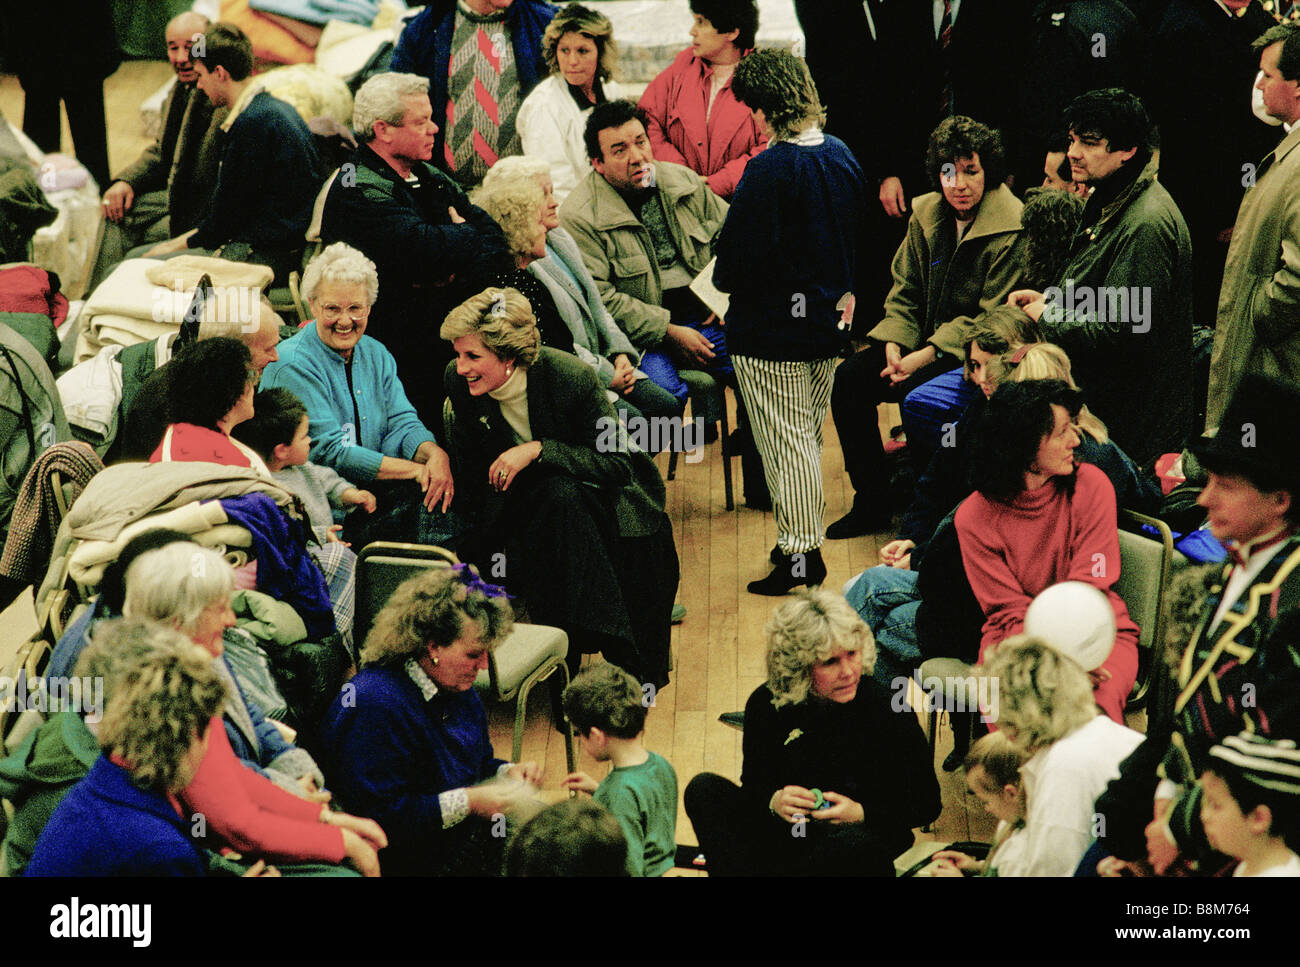 Towyn, Wales, February 1990: Hurricane winds cause the sea wall at Towyn to be break, flooding the north Wales coastal town.   Diana, Princess of Wales talks to displaced residents of the flooded town Towyn in a town hall. Stock Photo